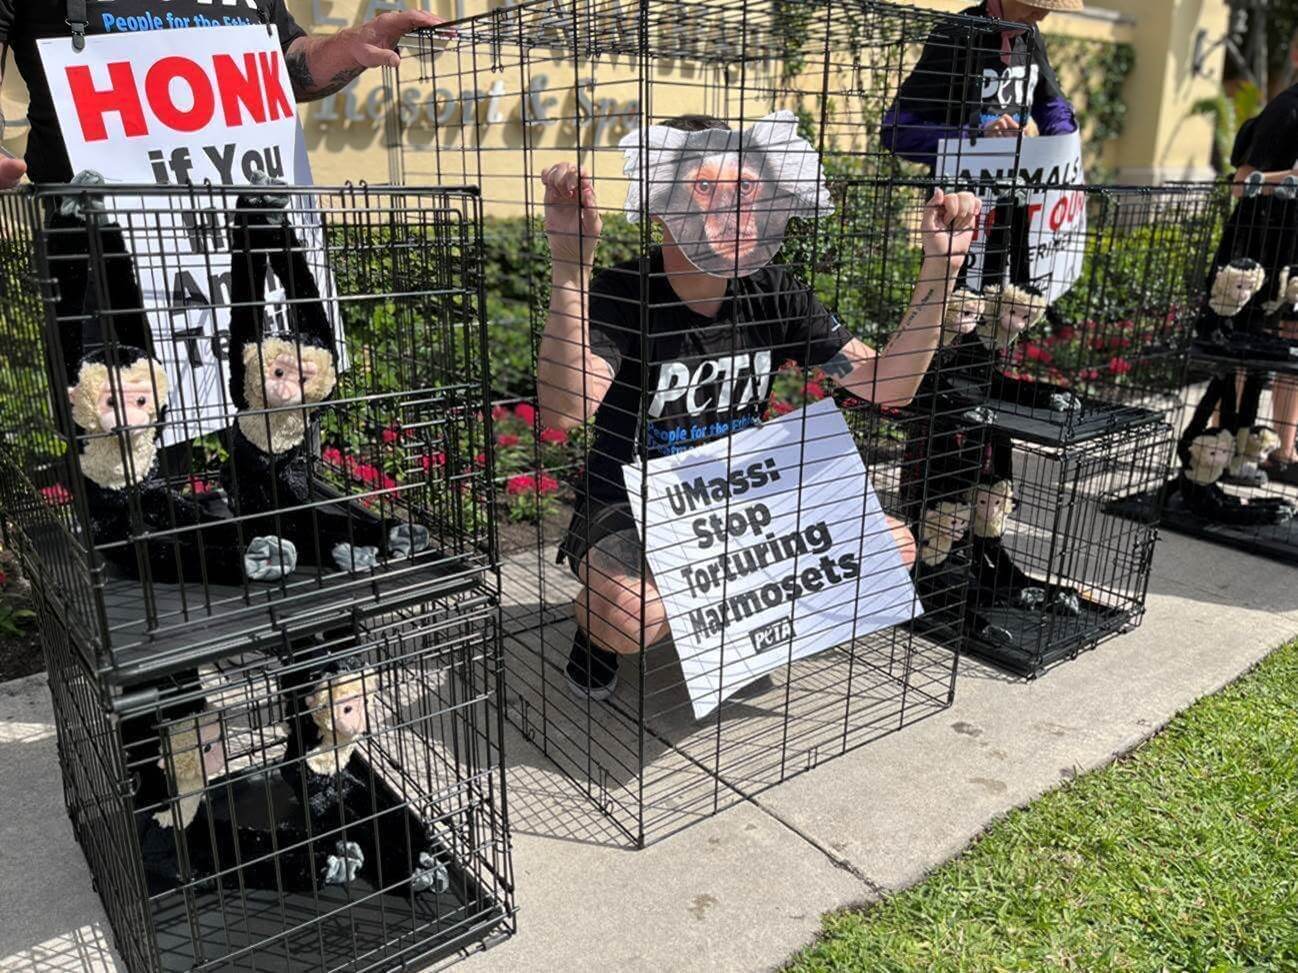 PETA supporters in marmoset monkey masks and stuffed monkeys in cages greeted resort guests and alumni attendees at two UMass speaking events hosted at Florida resorts